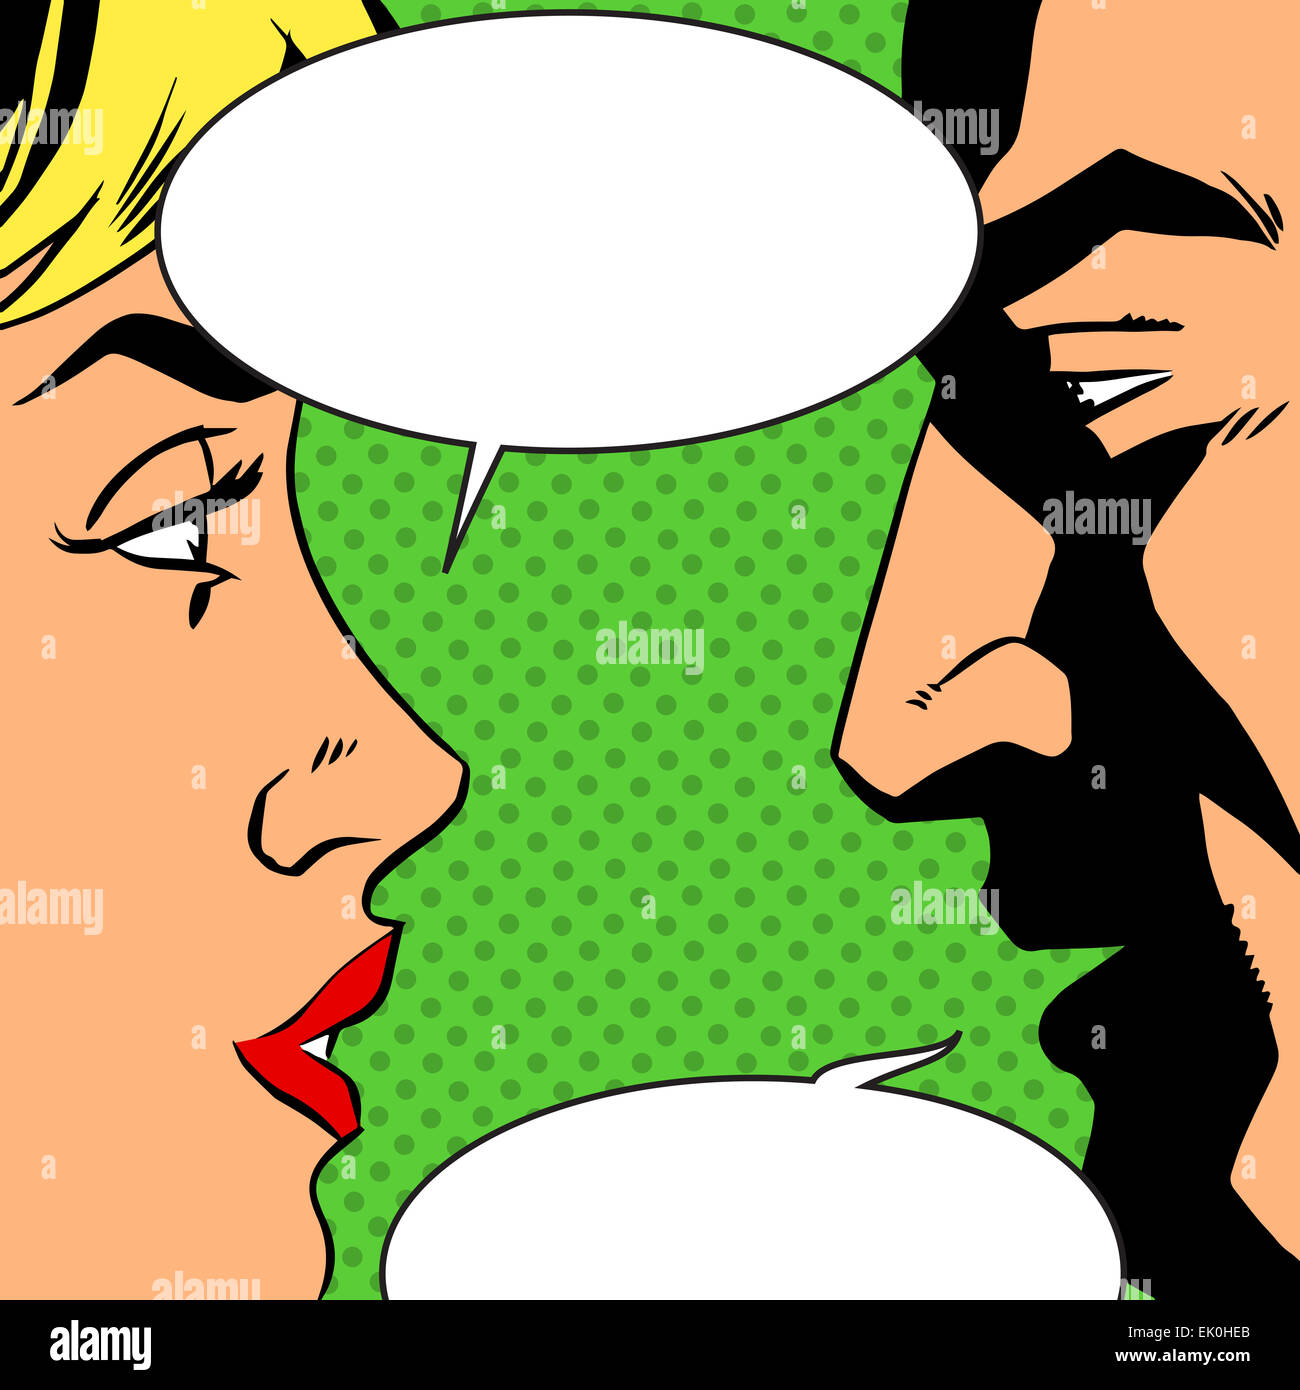 Man and woman talking comics retro style. Bubbles for text. The theme of love, relationships and communication. Imitation bitmap Stock Photo